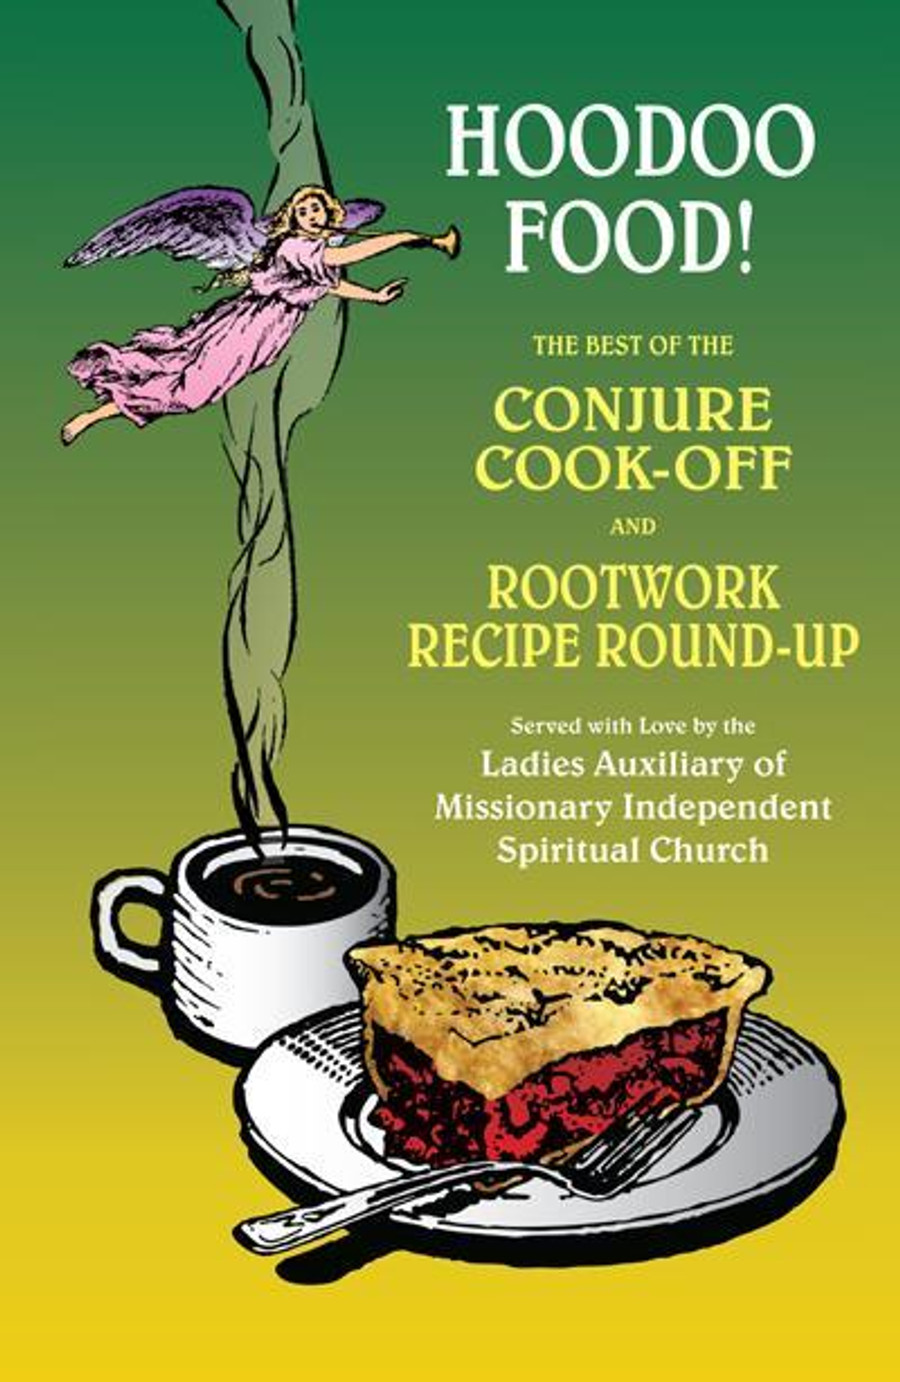 Hoodoo Food! The Best of the Conjure Cook-Off by Sister Robin Petersen